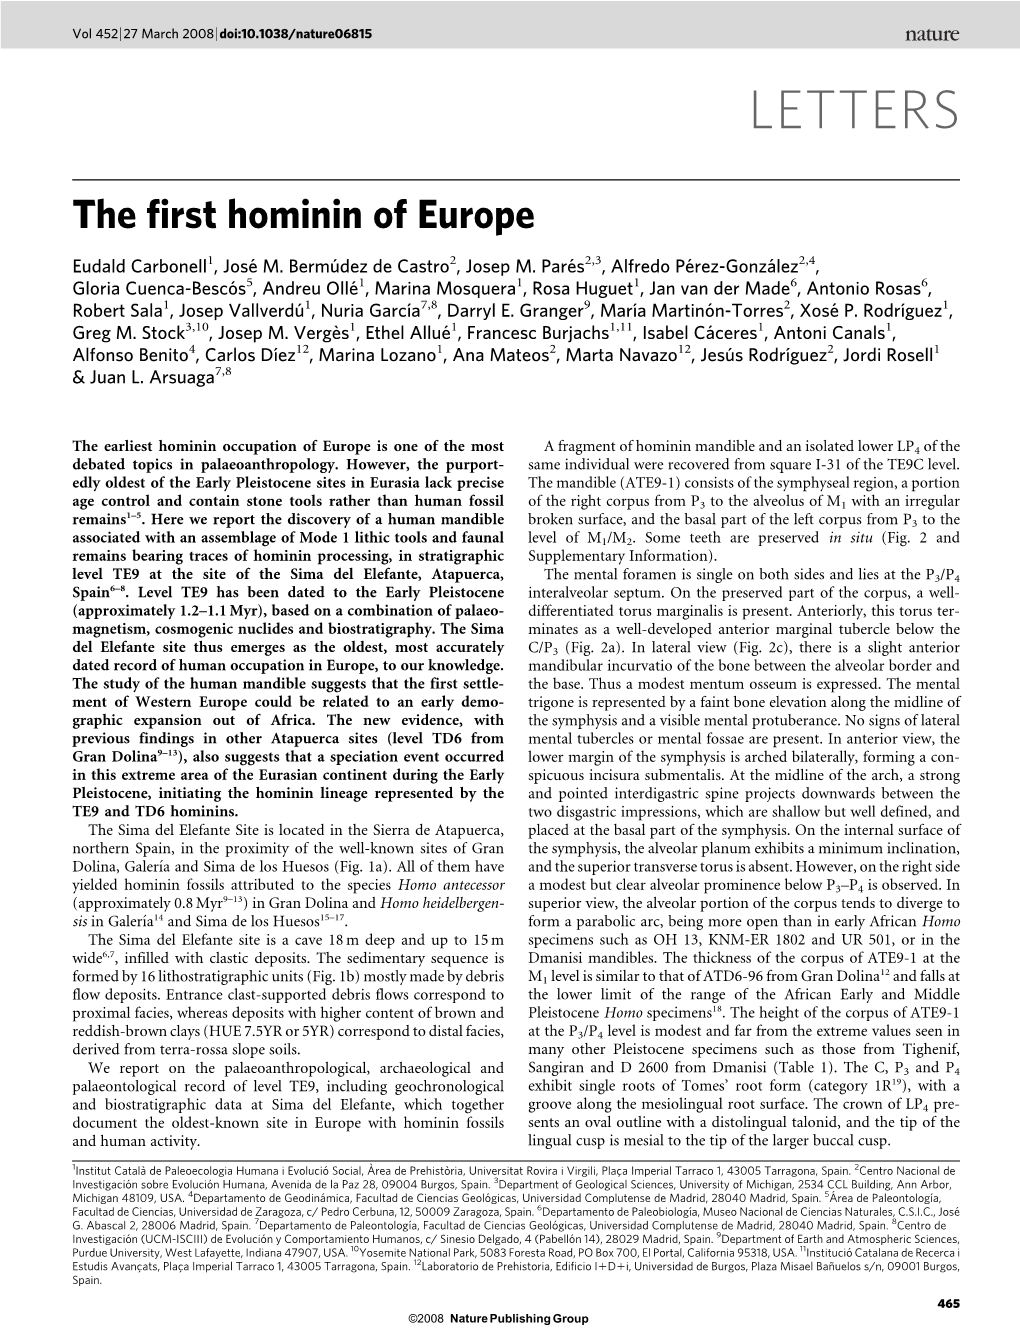 First Hominin of Europe